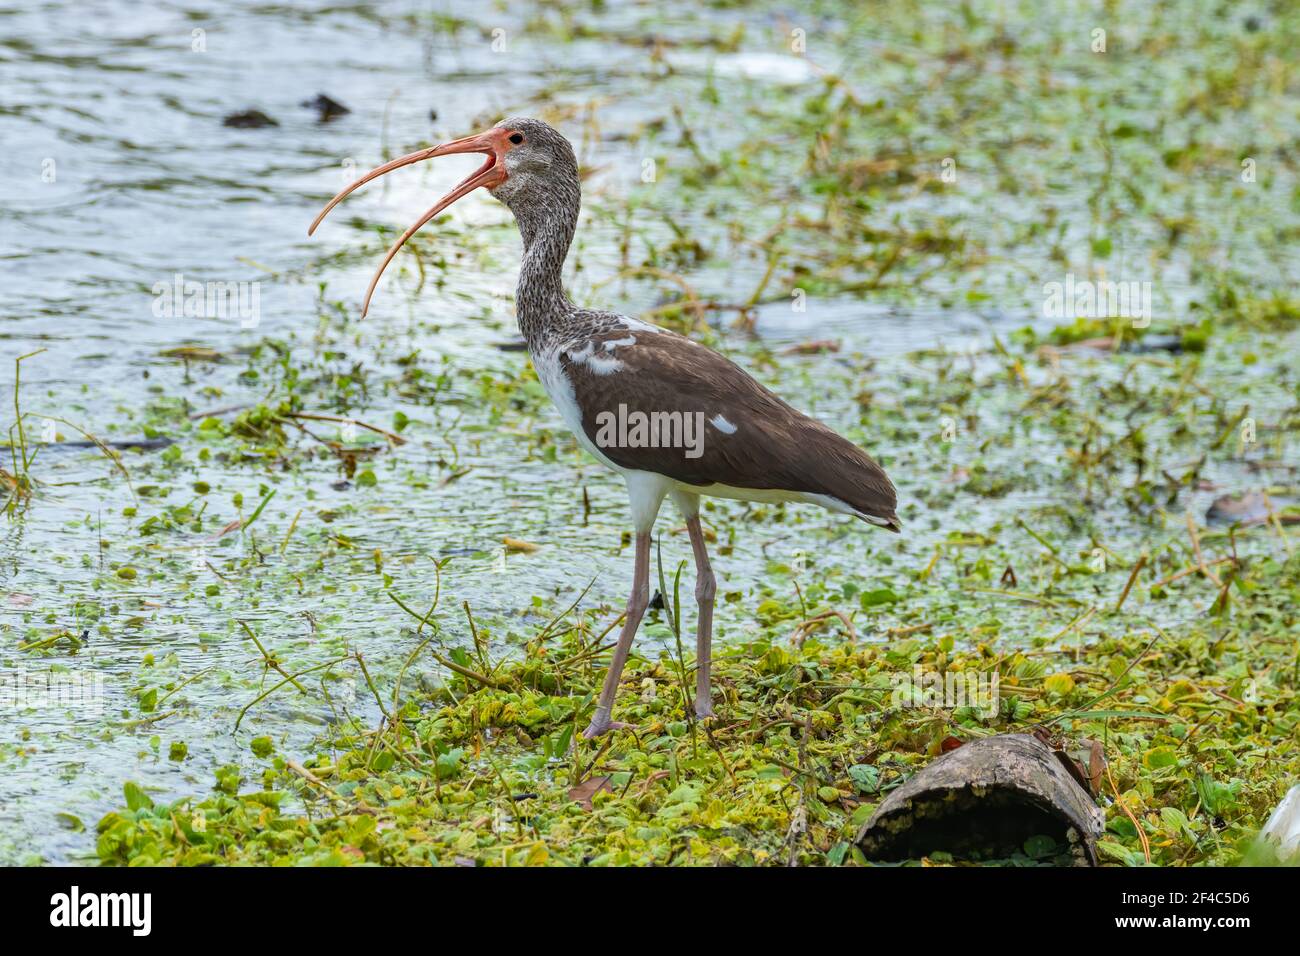 Immature white ibis with its beak open while foraging on the shore of a pond. Stock Photo